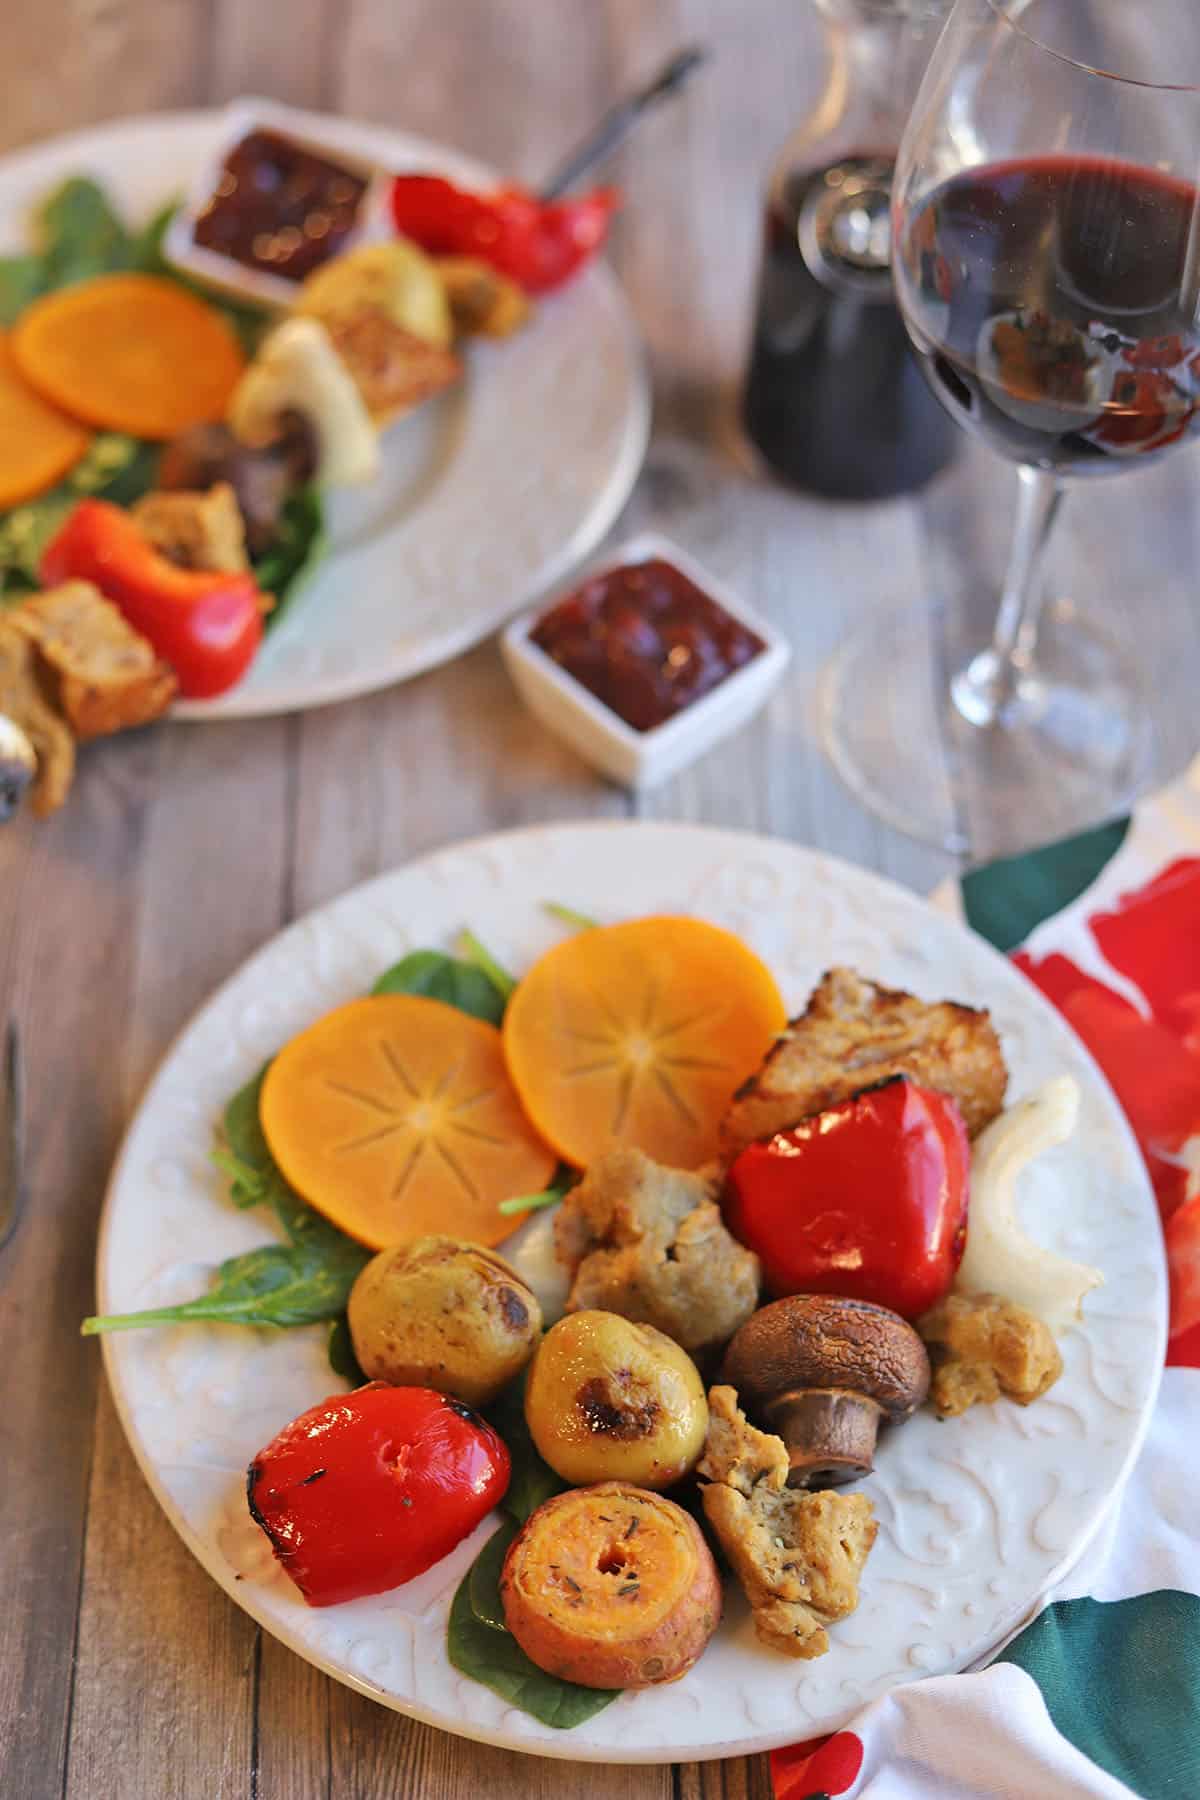 Grilled vegetables and seitan on plate by glass of wine.